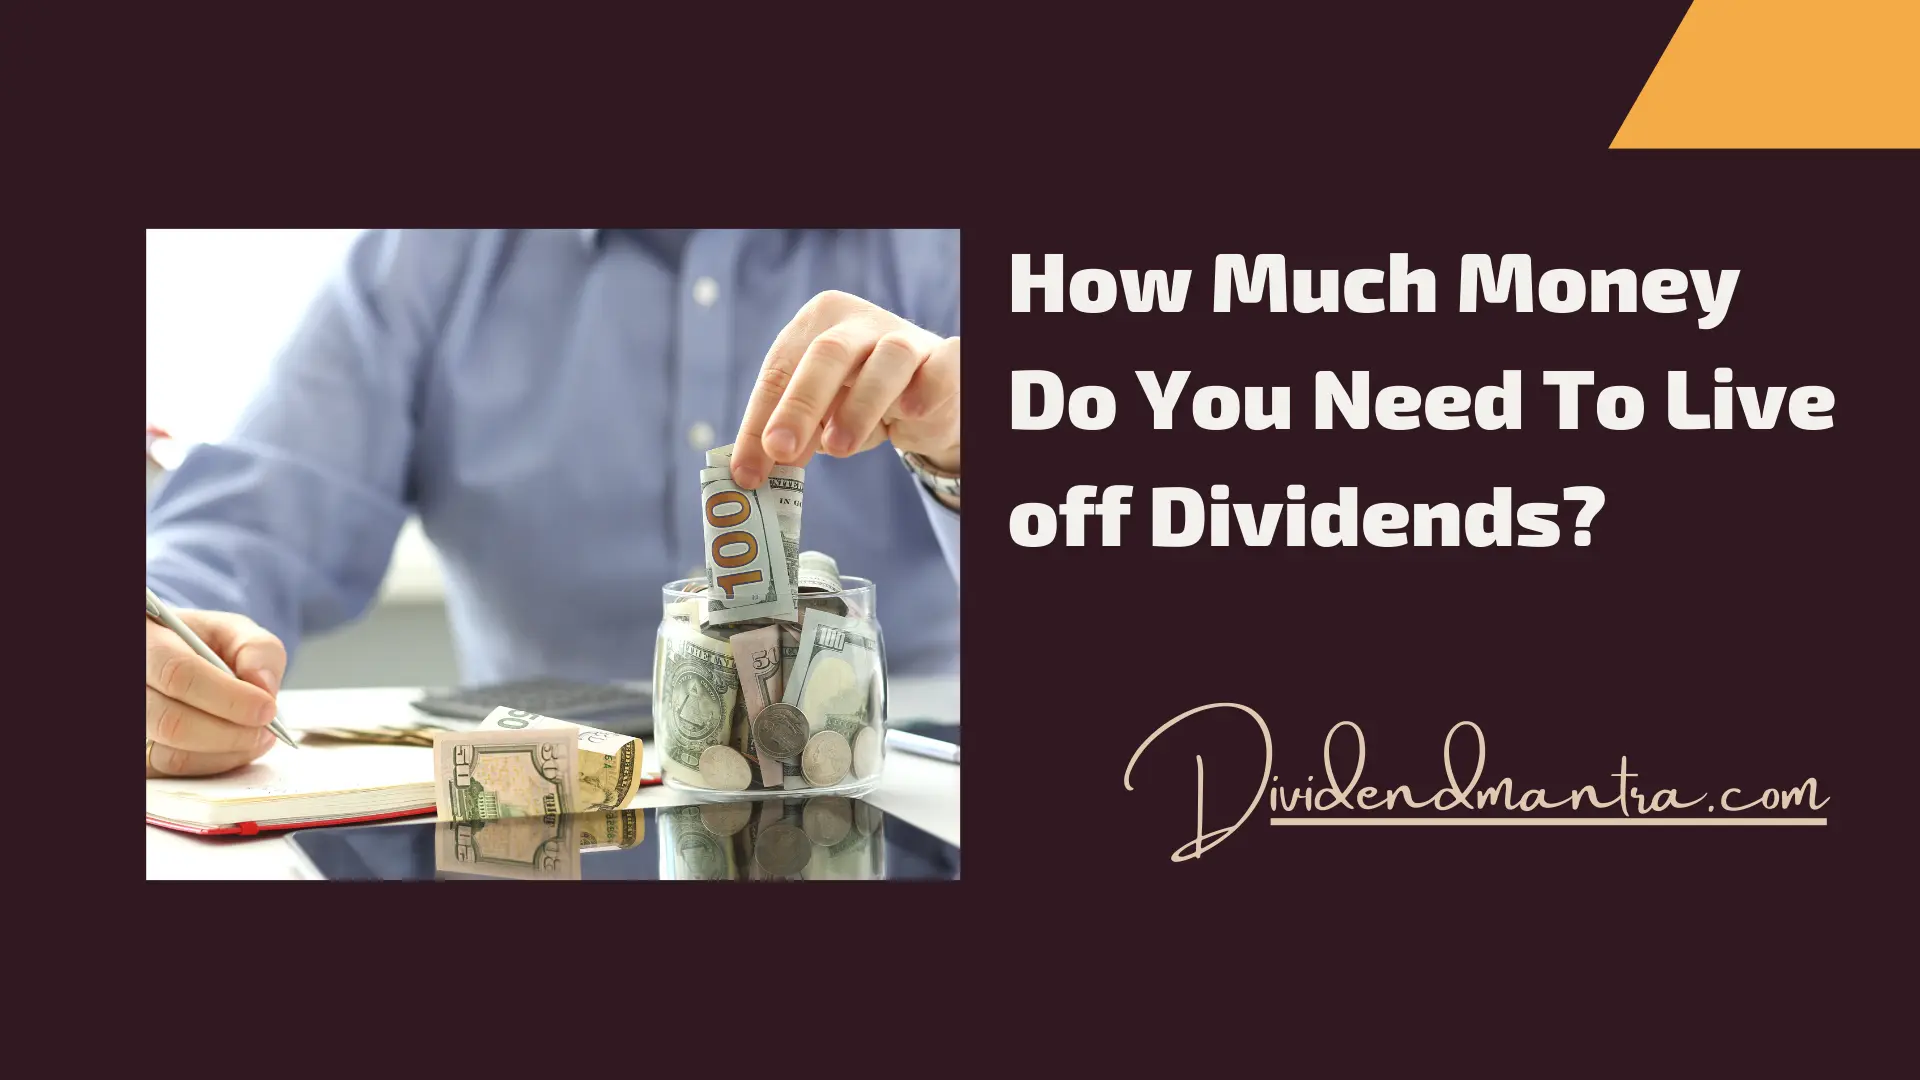 How Much Money Do You Need To Live off Dividends?